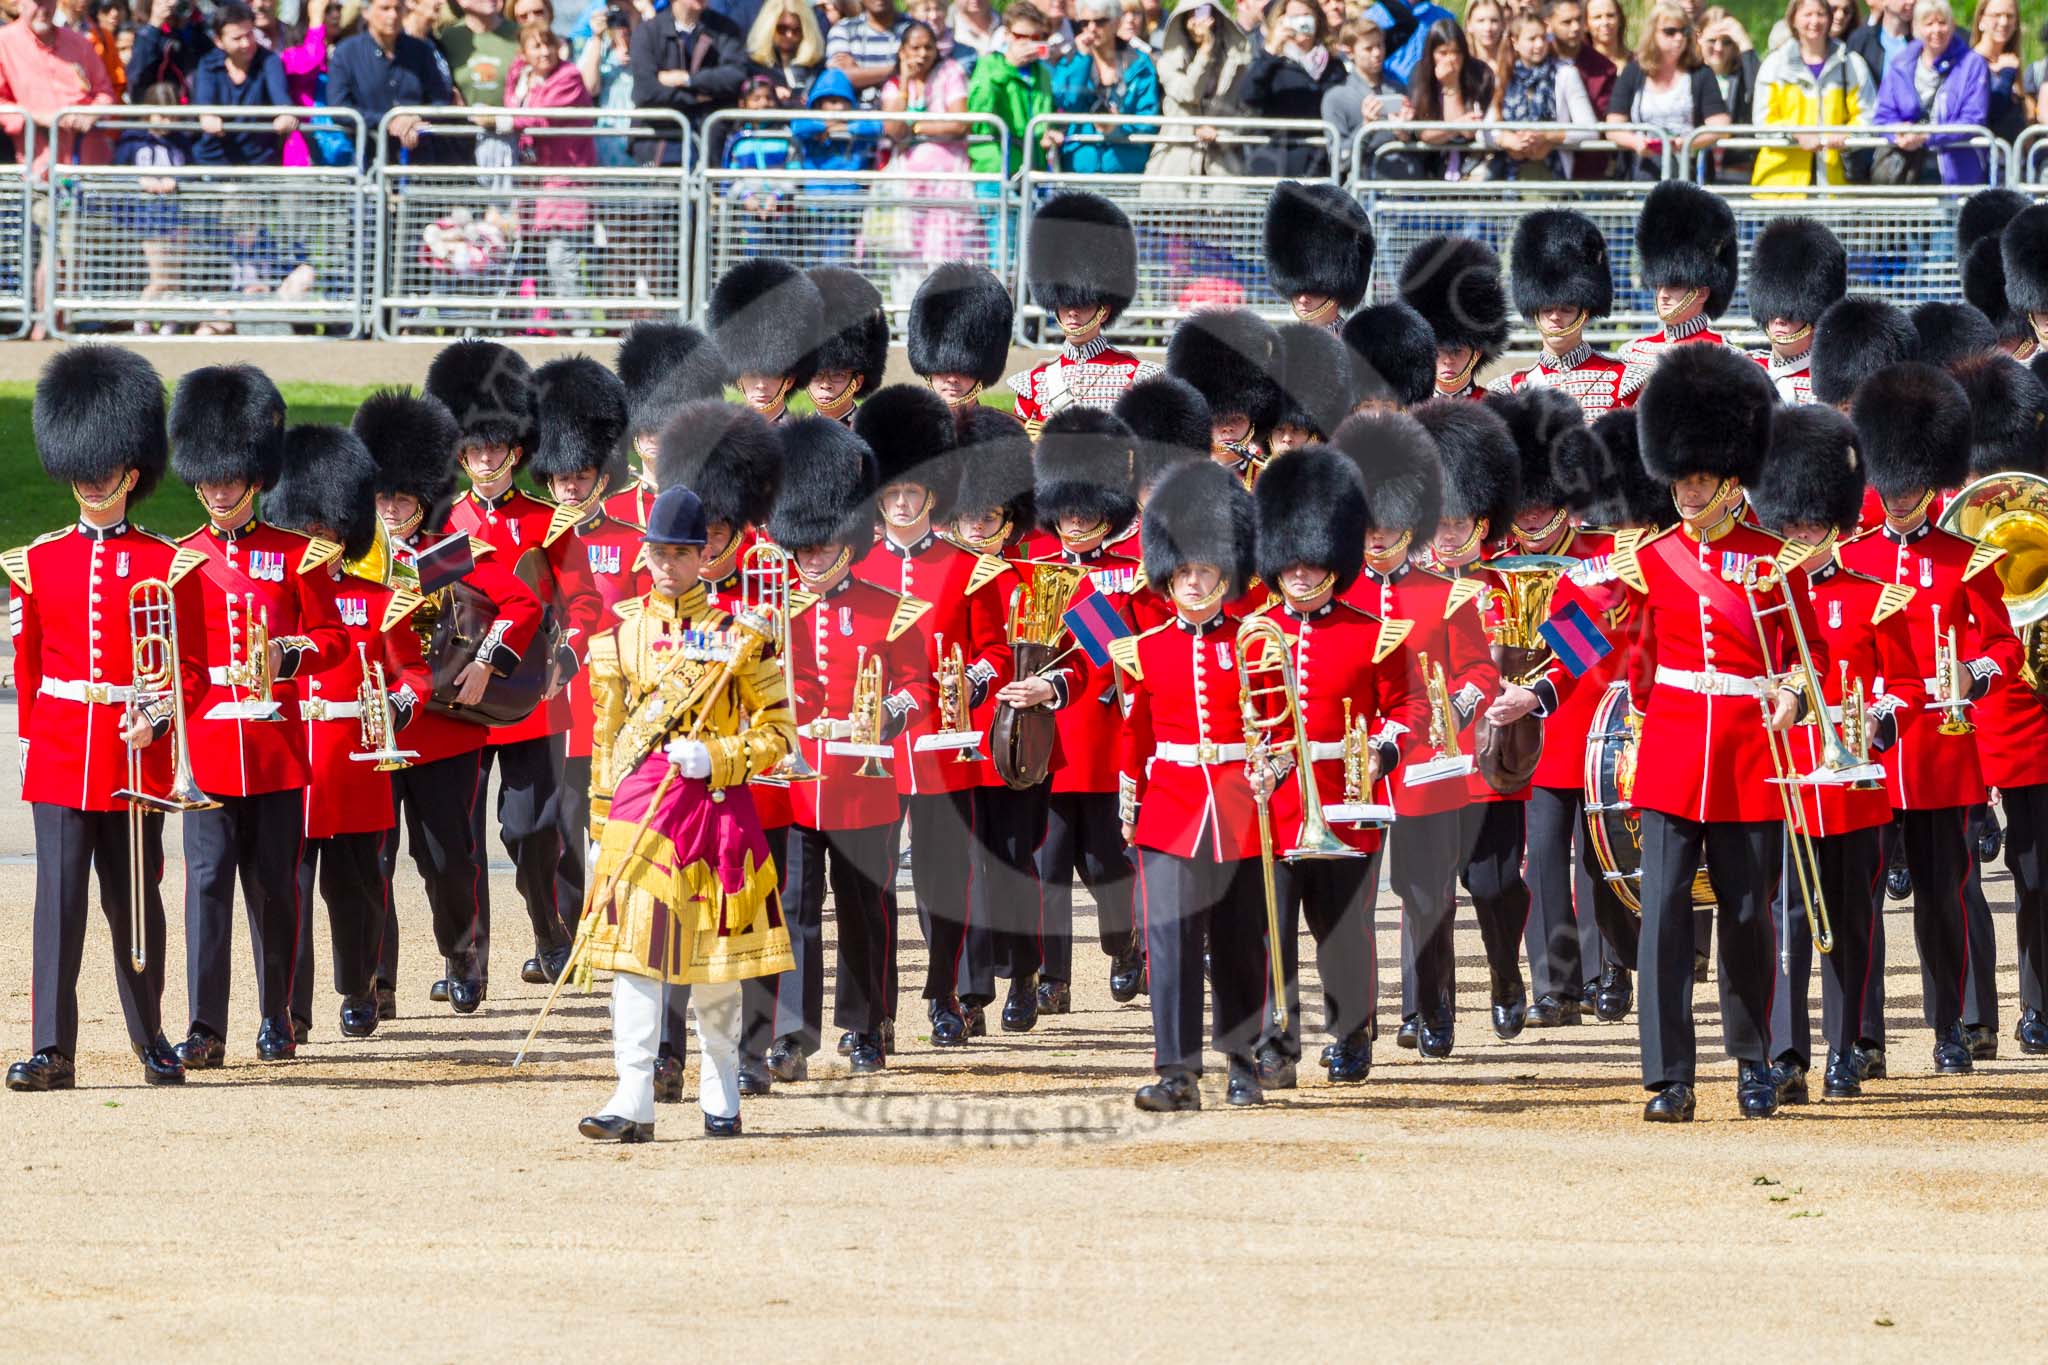 The Colonel's Review 2015.
Horse Guards Parade, Westminster,
London,

United Kingdom,
on 06 June 2015 at 10:28, image #75